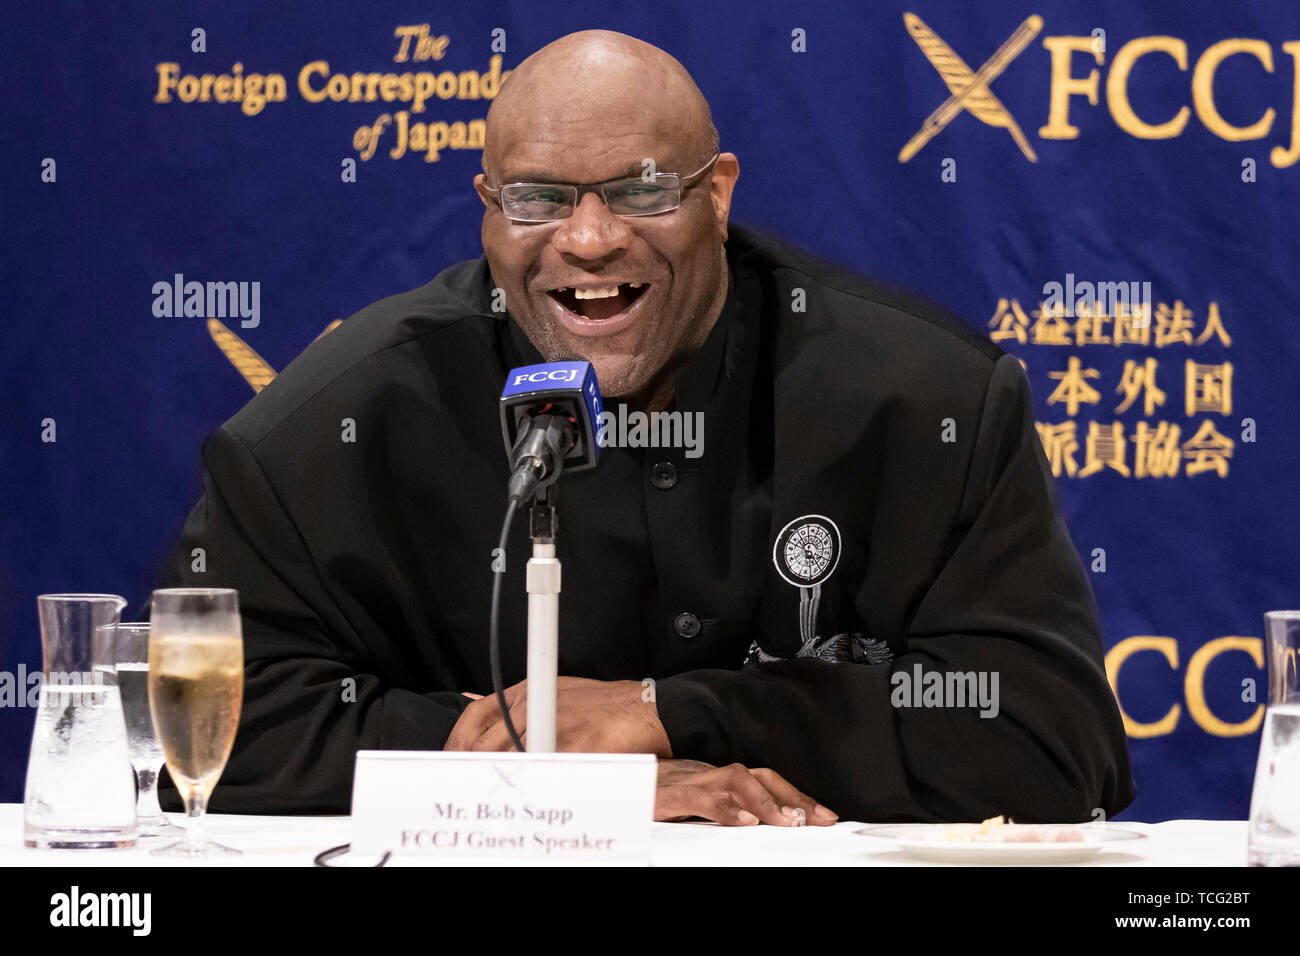 Tokyo, Japan. 07th June, 2019. American pro fighter and actor Bob Sapp speaks during a news conference at The Foreign Correspondents' Club of Japan. Sapp, who is also a former American NFL player, WWE professional wrestler and World Champion kick boxer visited the Club to share his opinions about the Japanese TV industry as a foreigner celebrity in Japan. As actor he participated in several movies including 'Conan the Barbarian' and with Adam Sandler in 'The Longest Yard'. Credit: Rodrigo Reyes Marin/AFLO/Alamy Live News Stock Photo